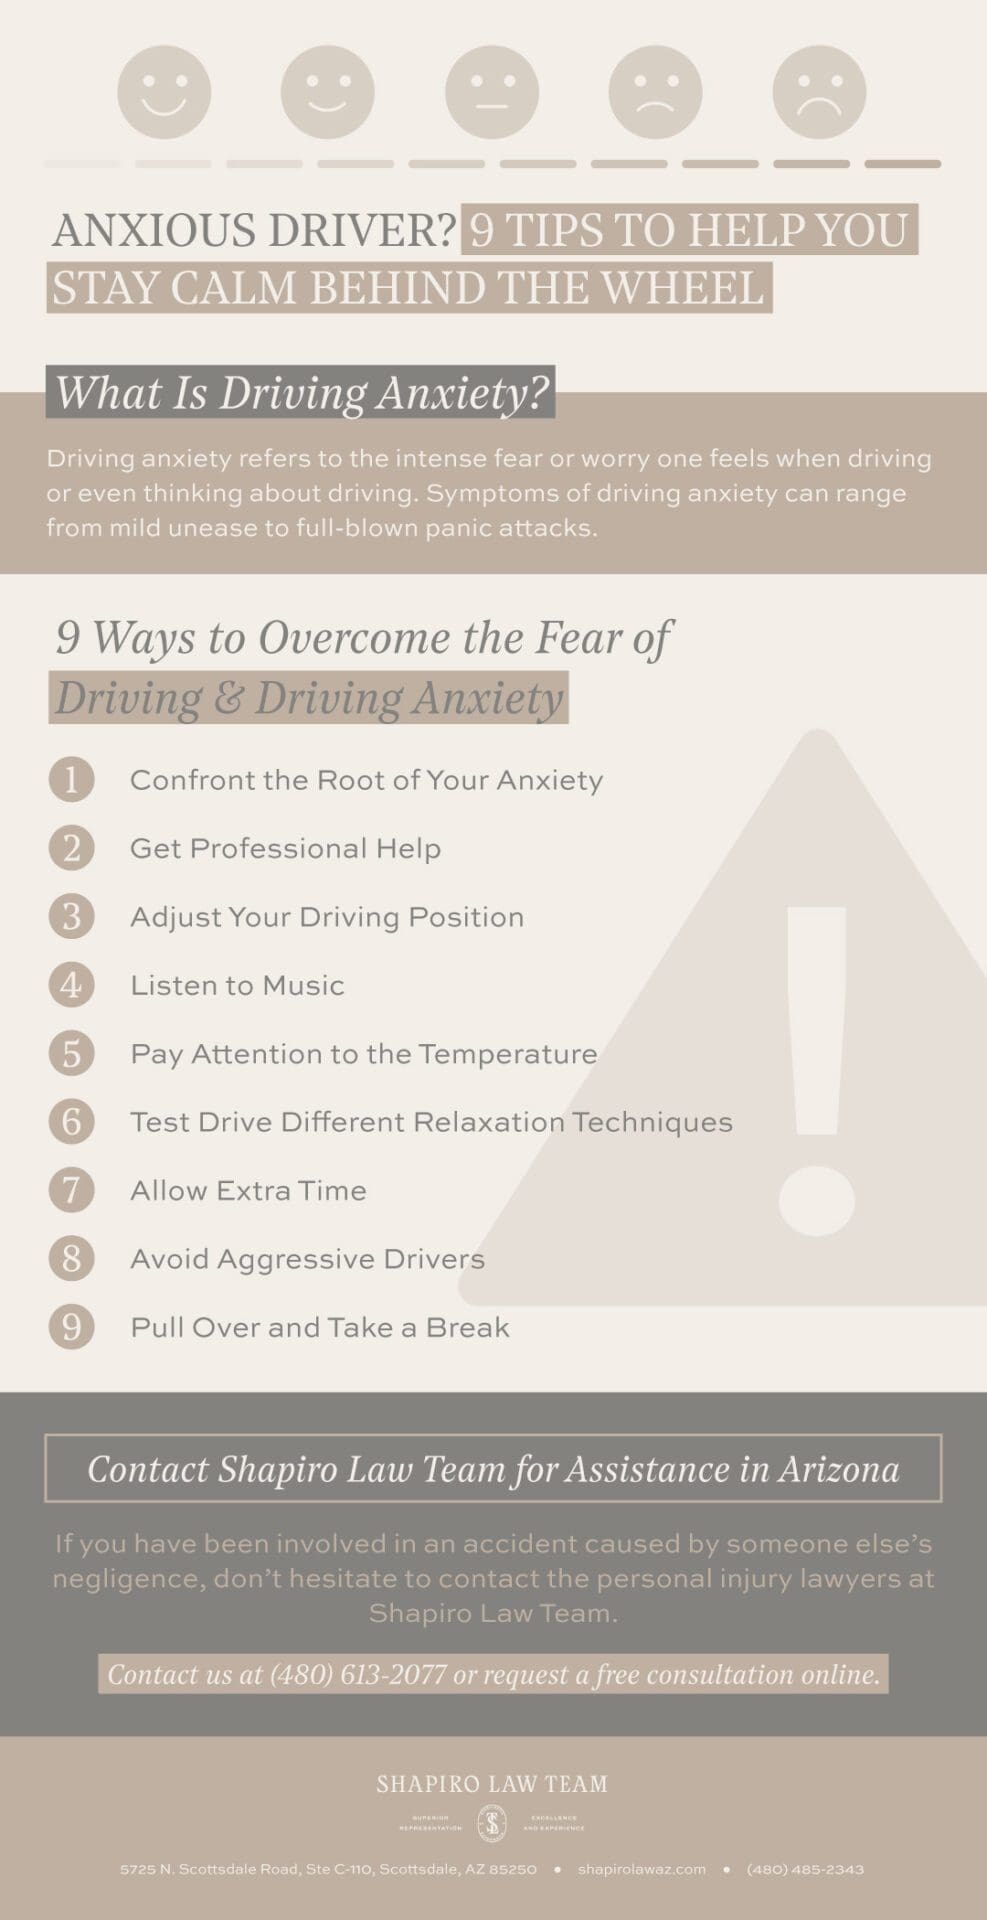 Fear of Driving